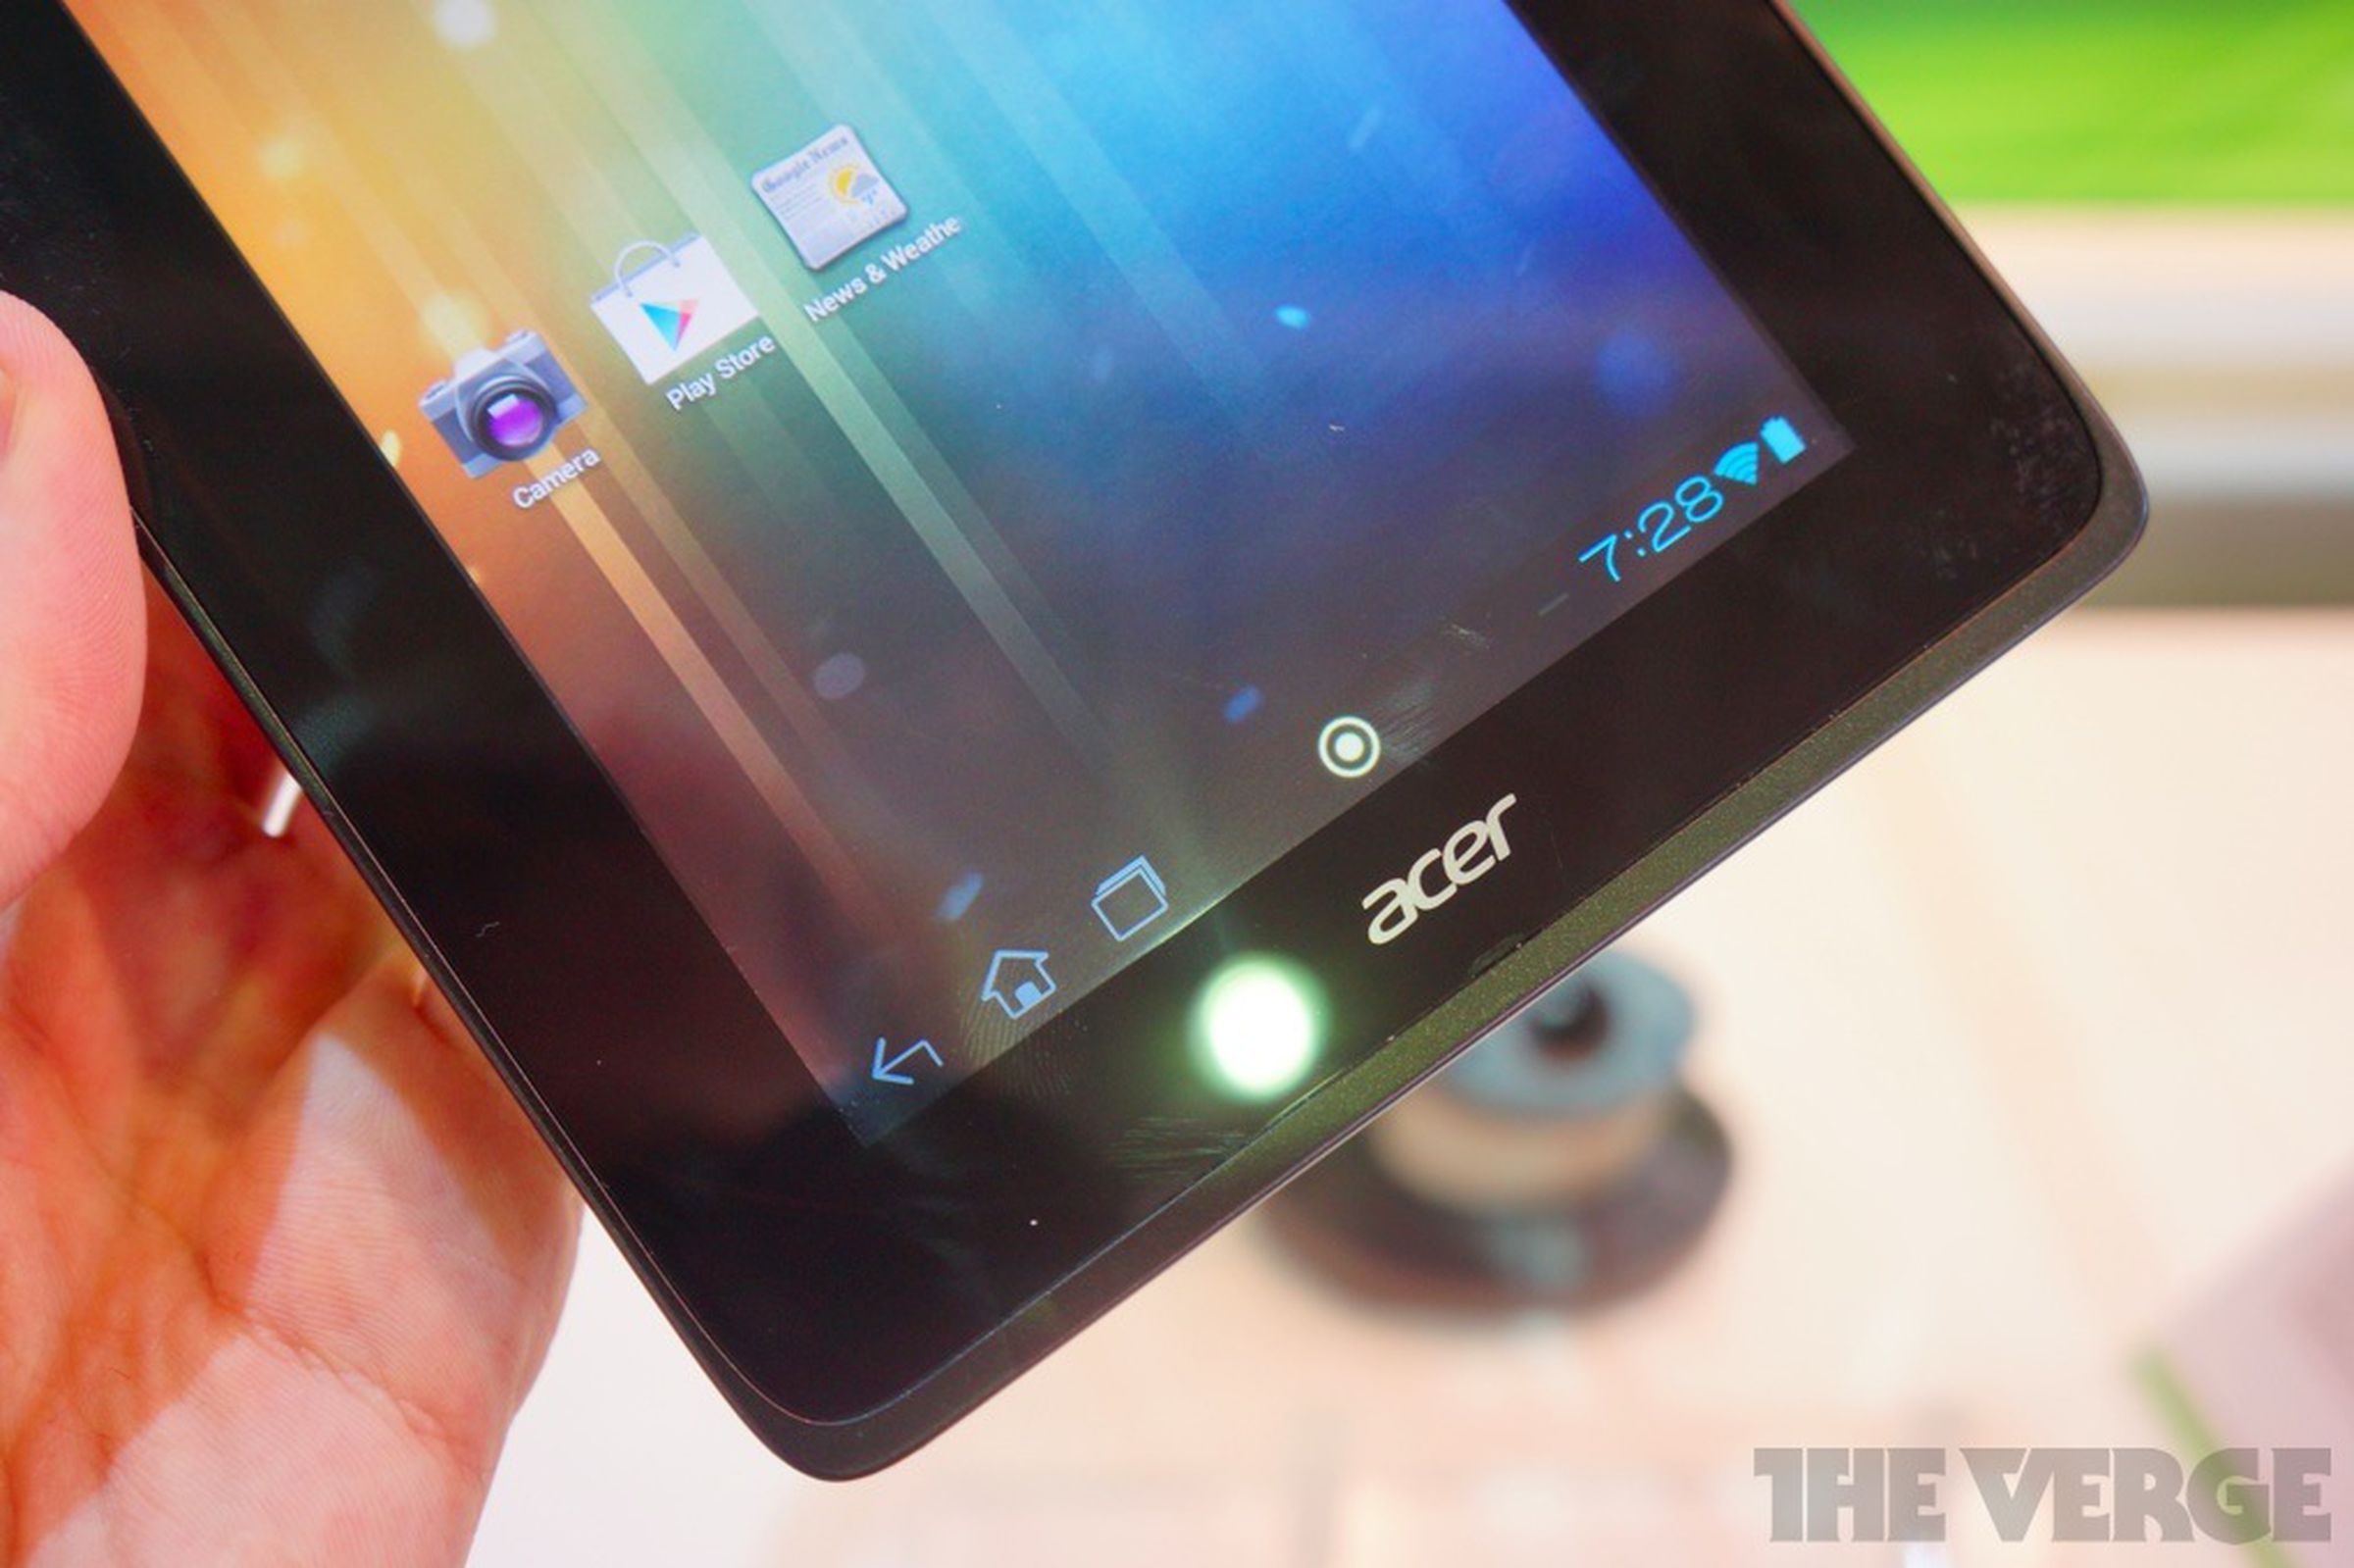 Acer Iconia Tab A110 and 210 hands-on photos